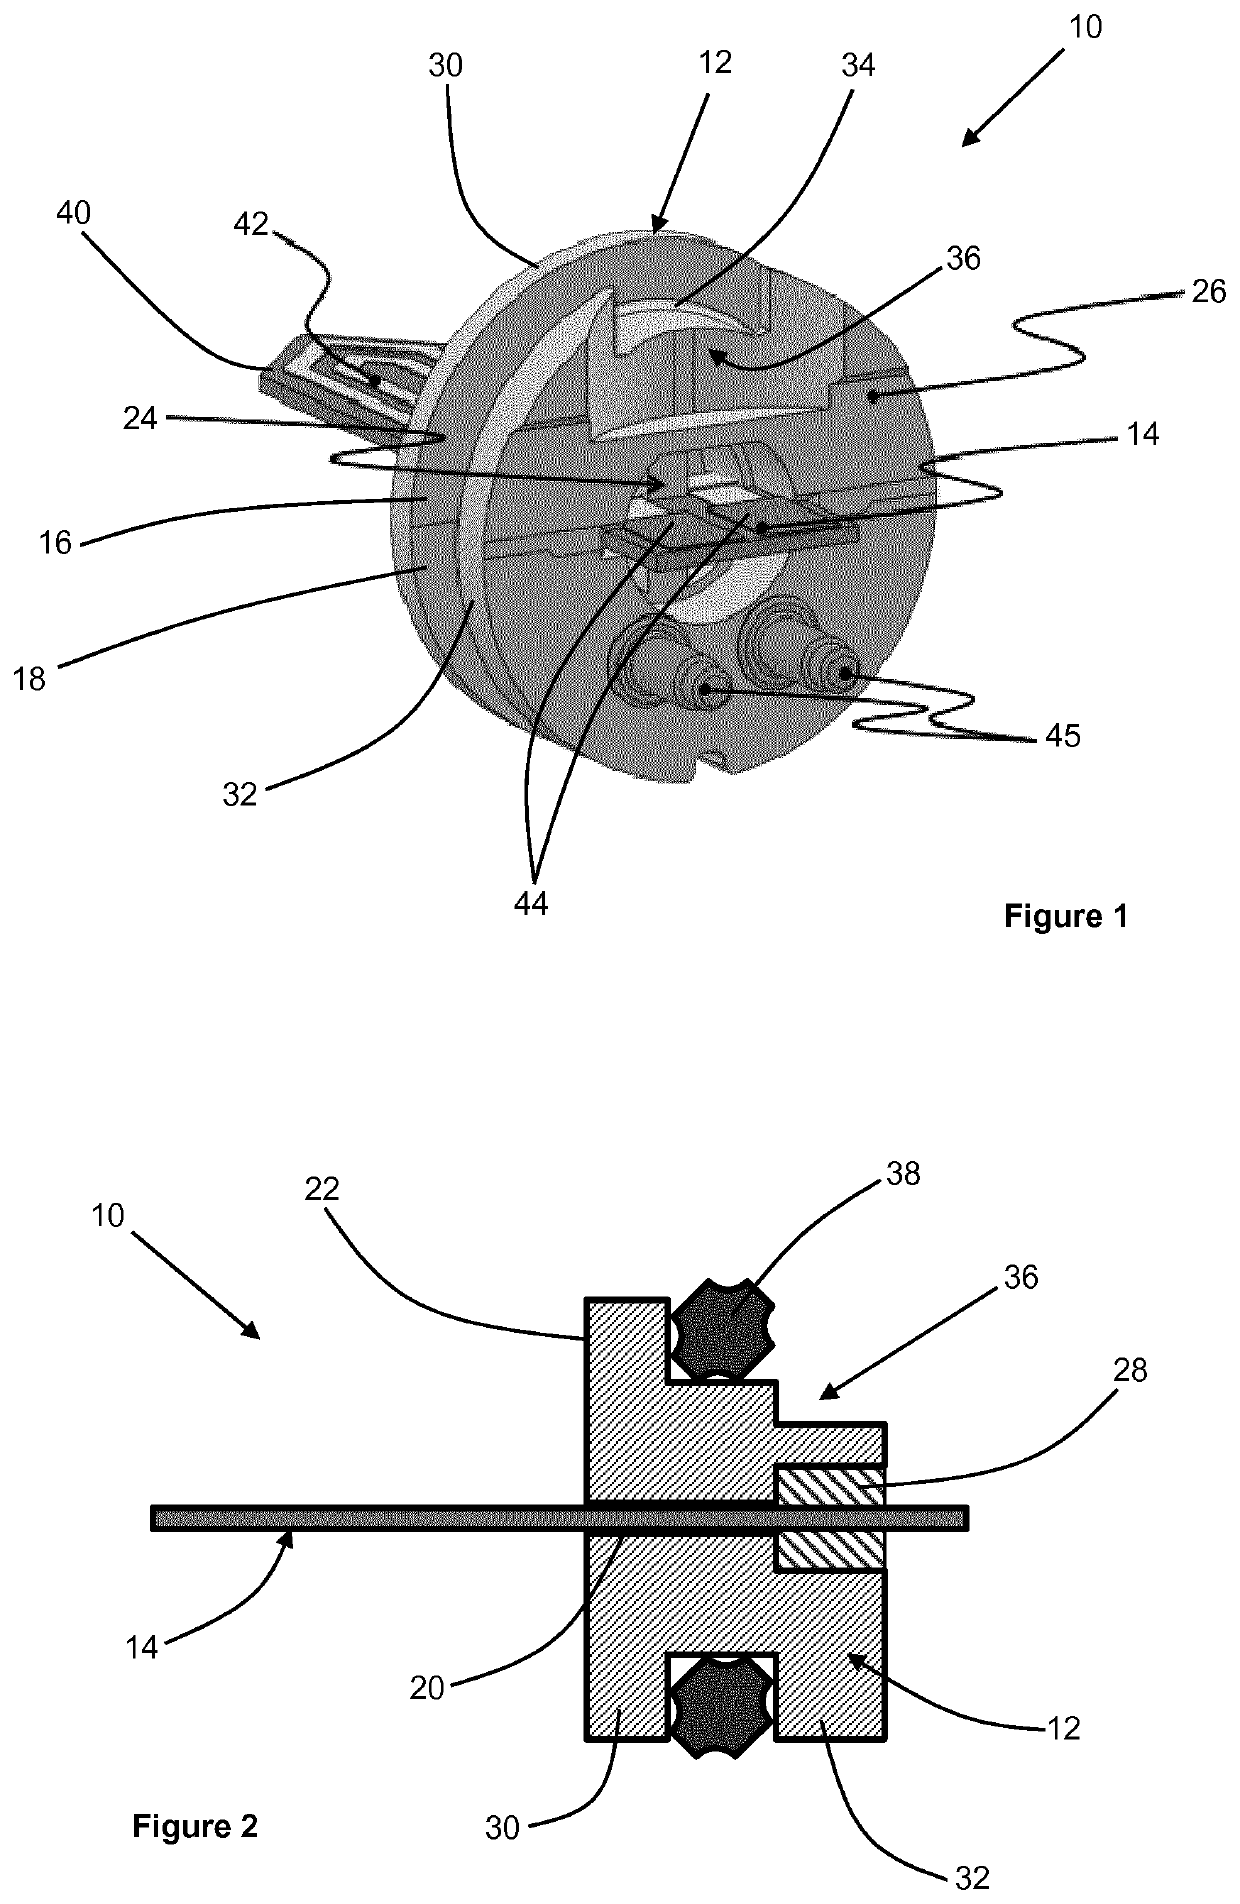 Heater assembly with cavity filled with a potting compound